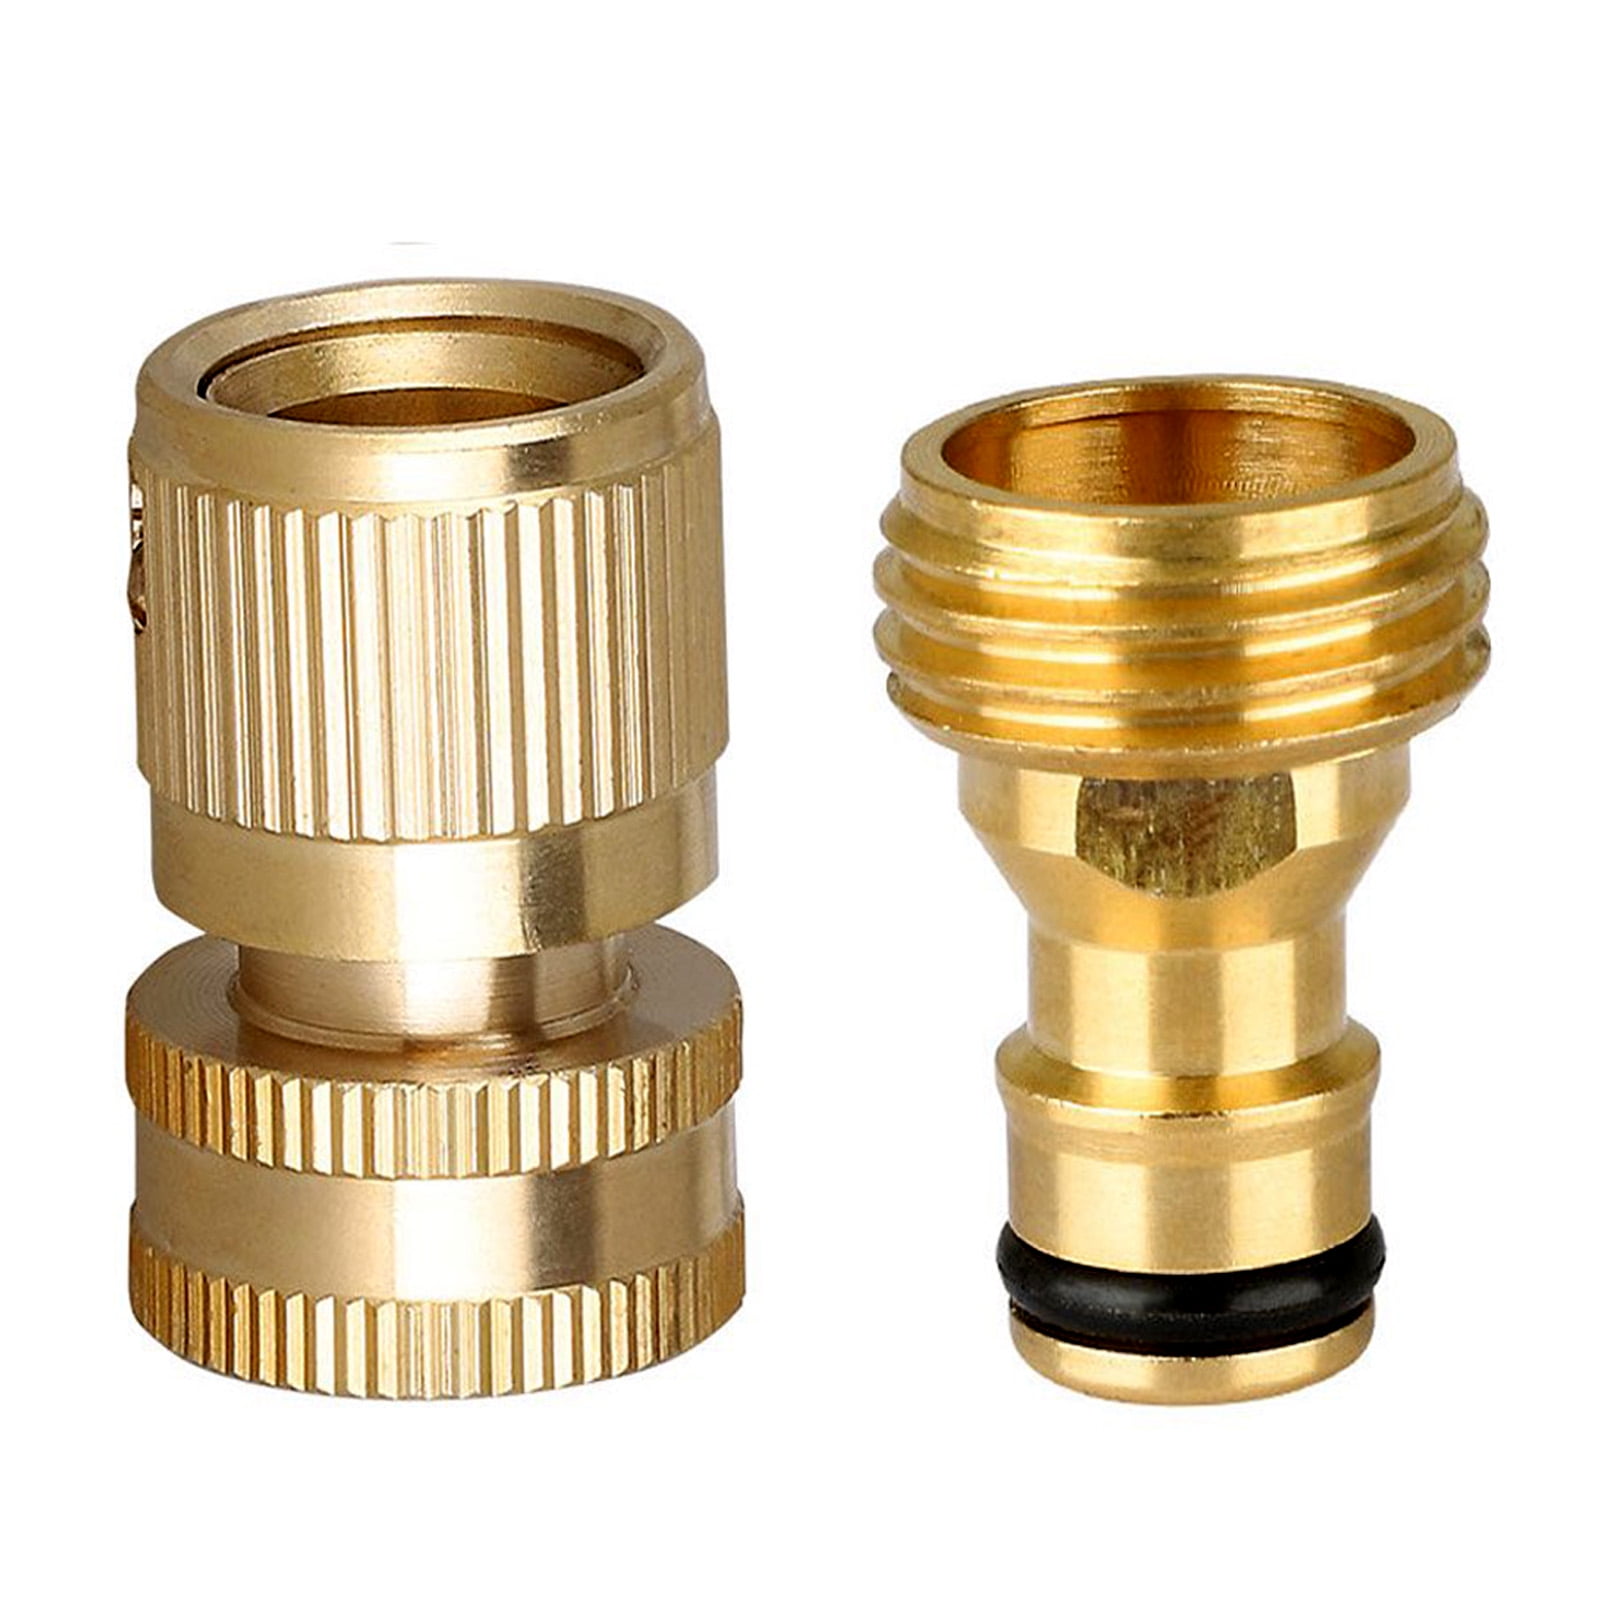 Brass Female Garden Hose Connector for Water Hose Pipes Quick Release 